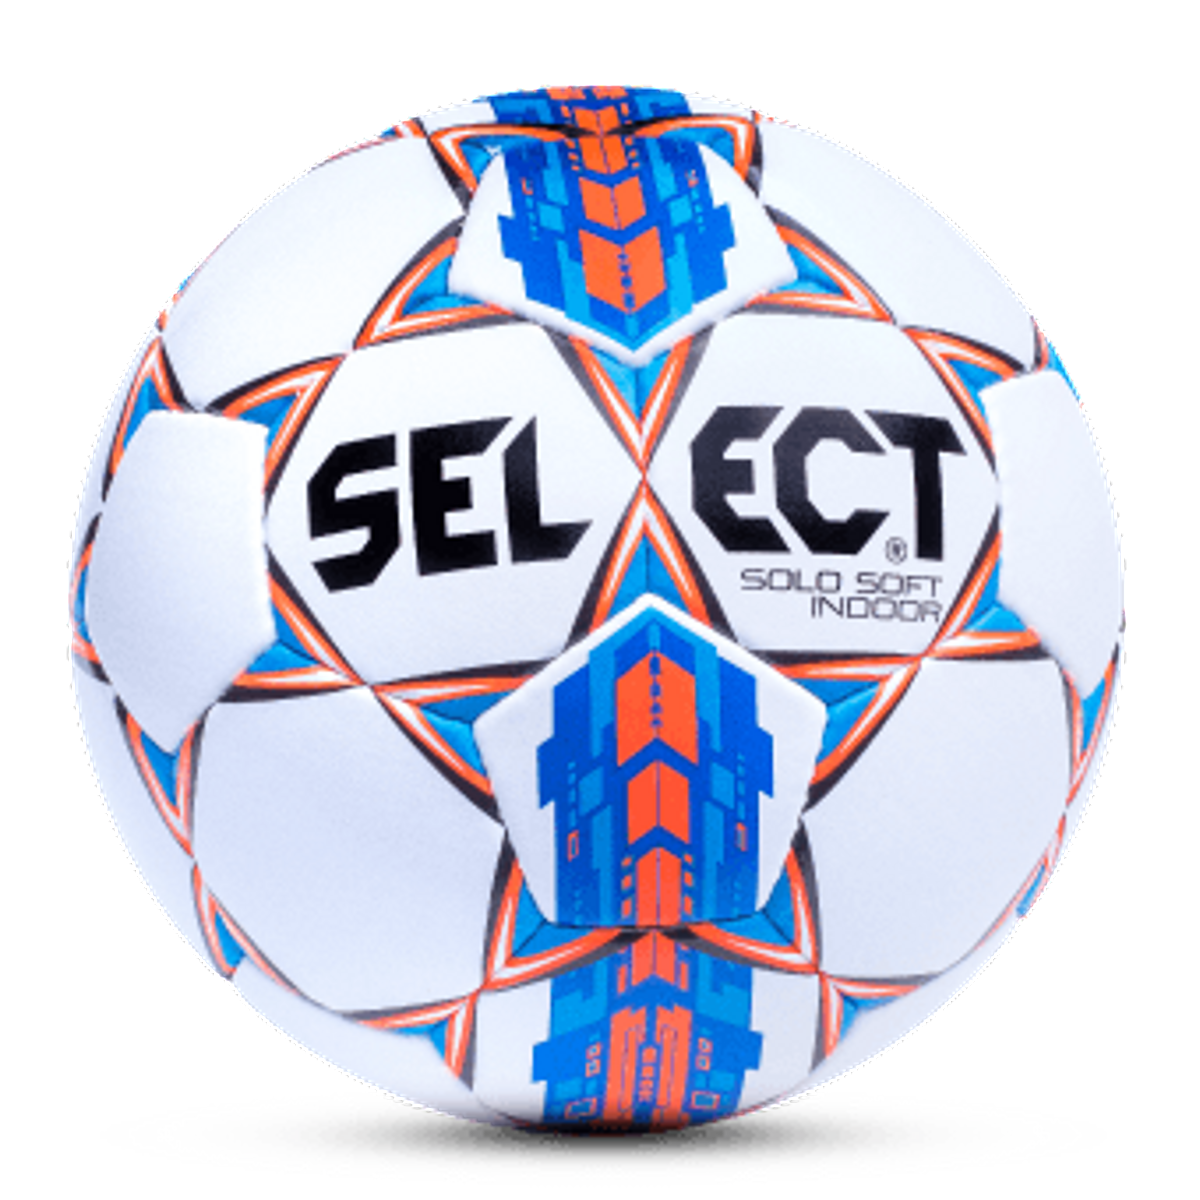 Select Solo Soft Indoor Voetbal